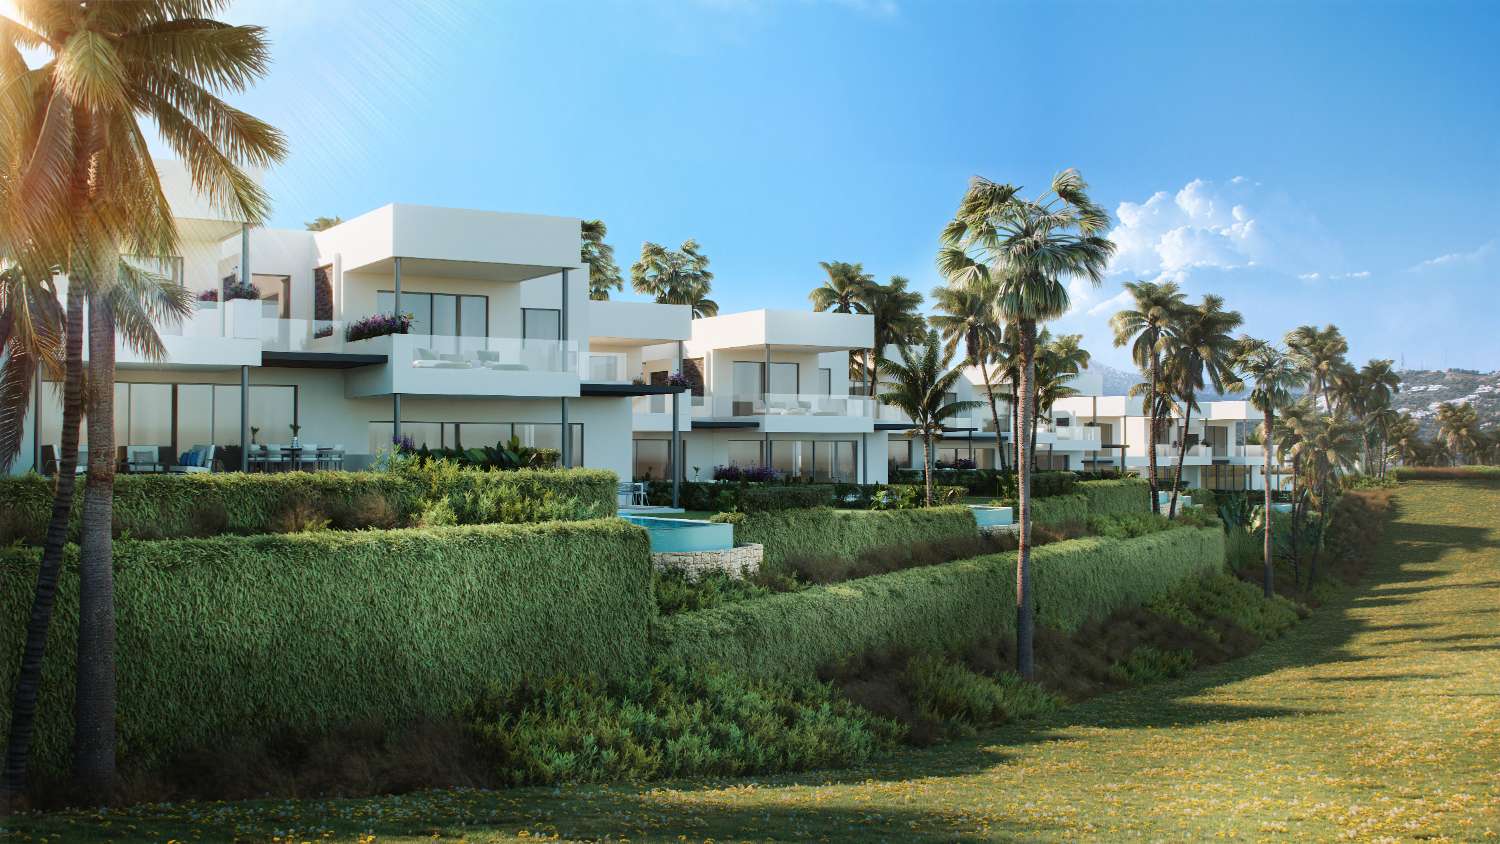 New villas with sea views in gated community with security and resort!